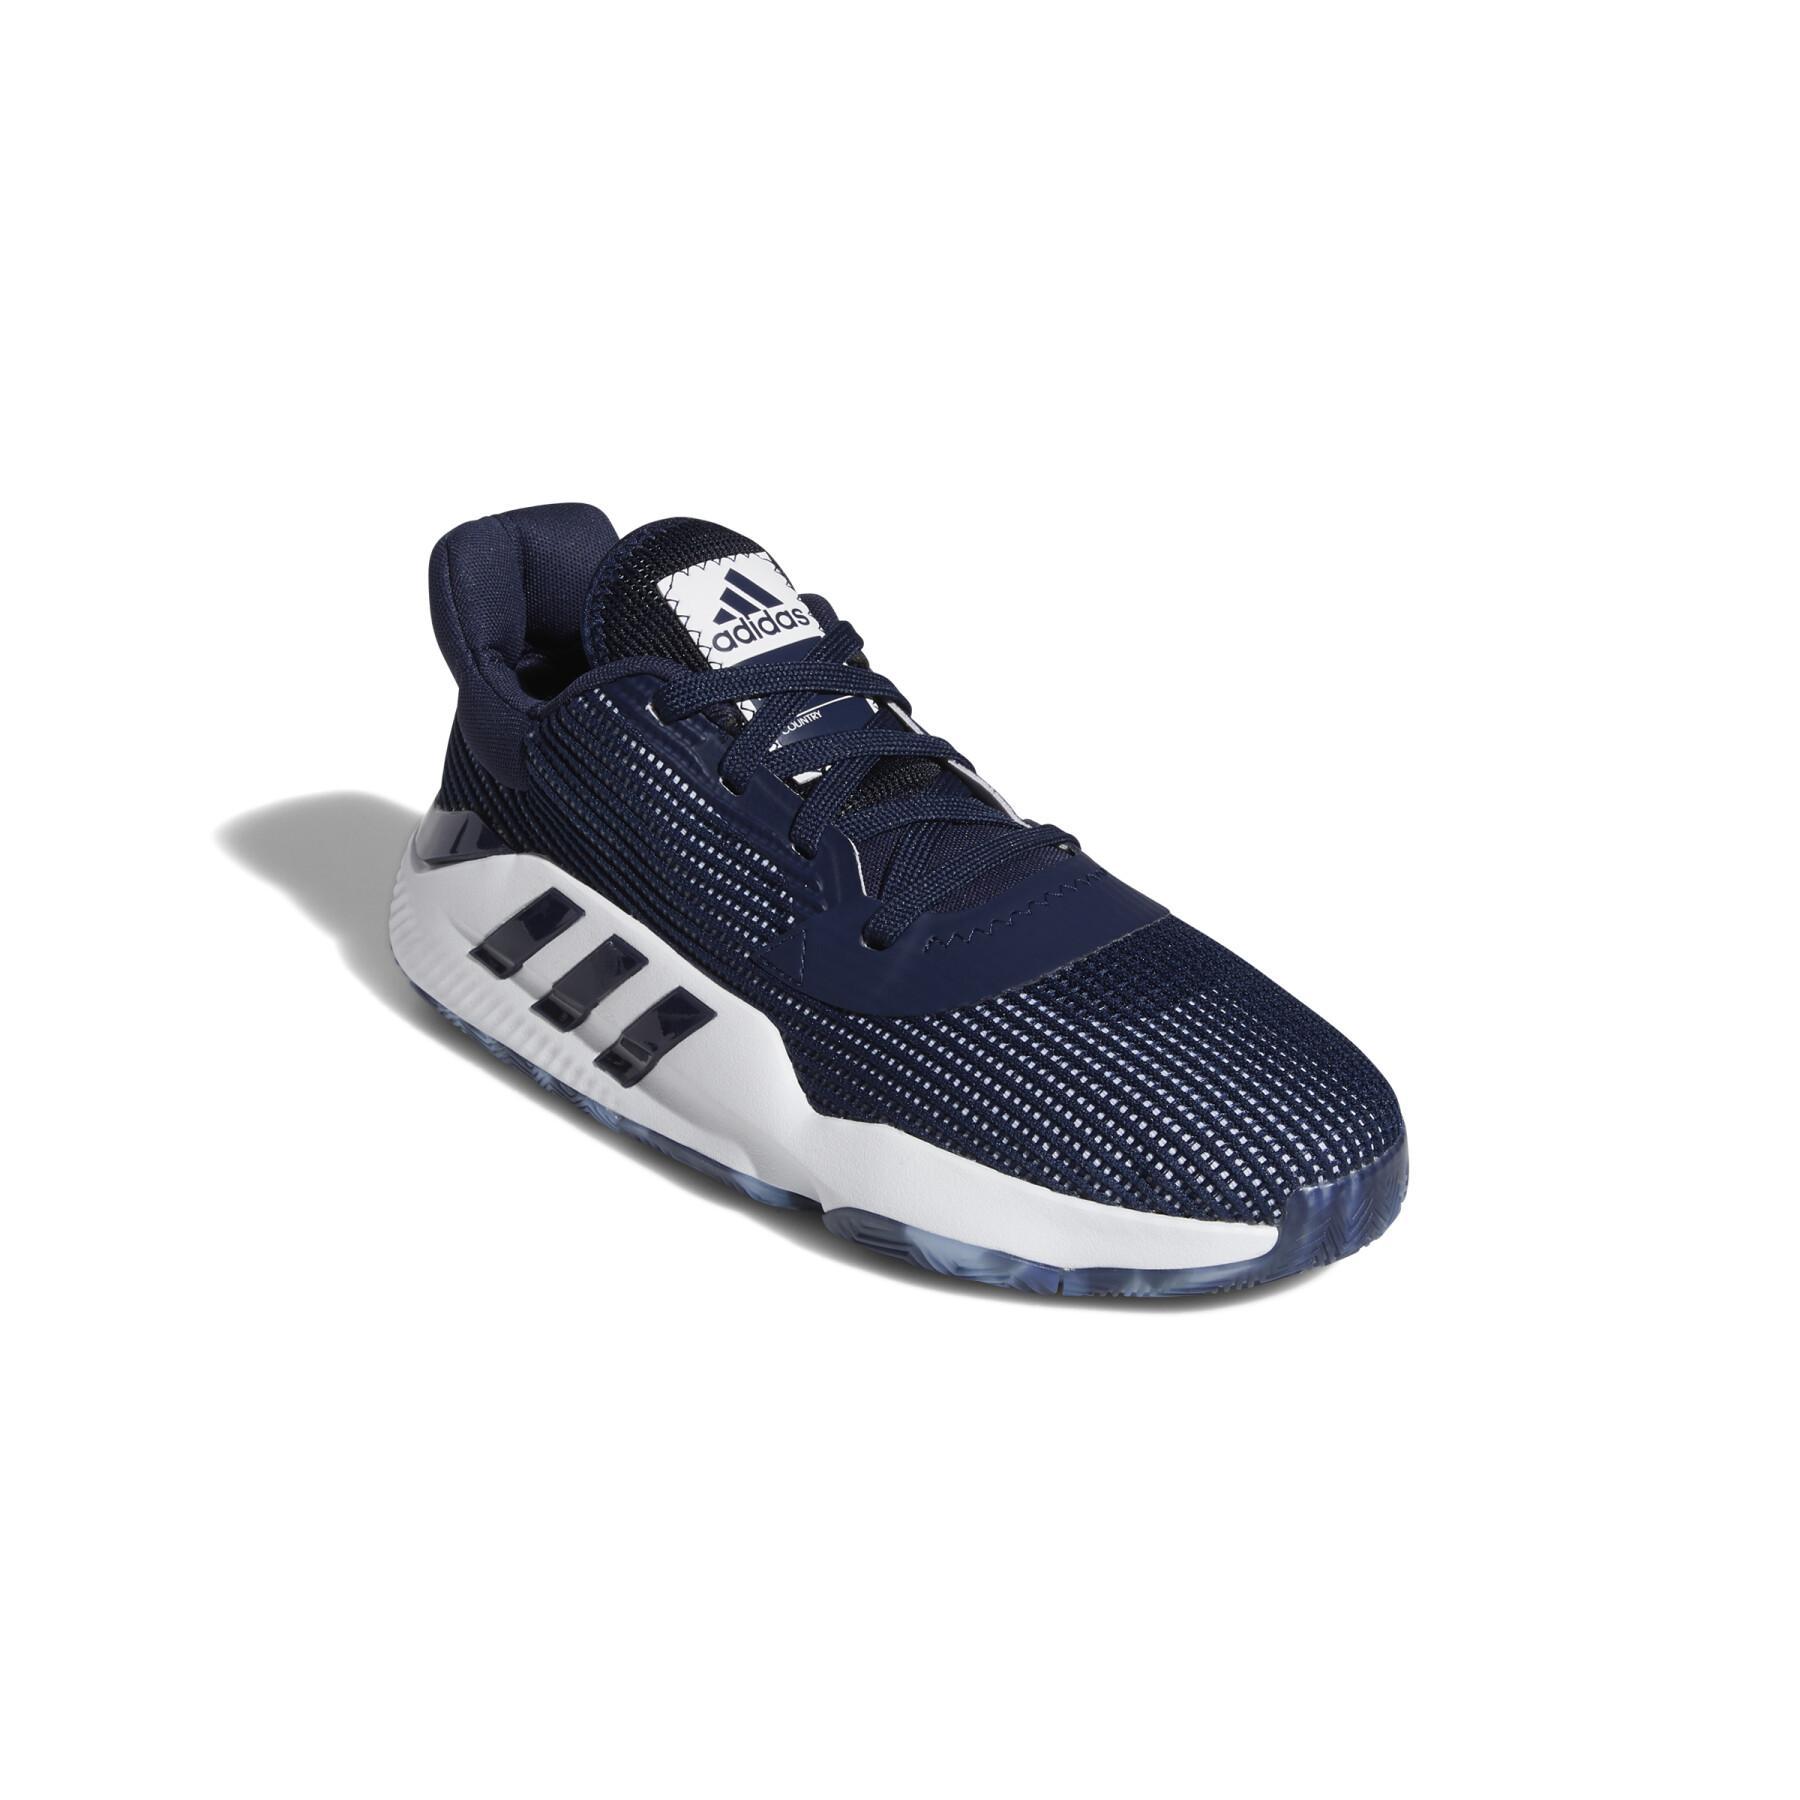 Chaussures indoor adidas Pro Bounce 2019 Low